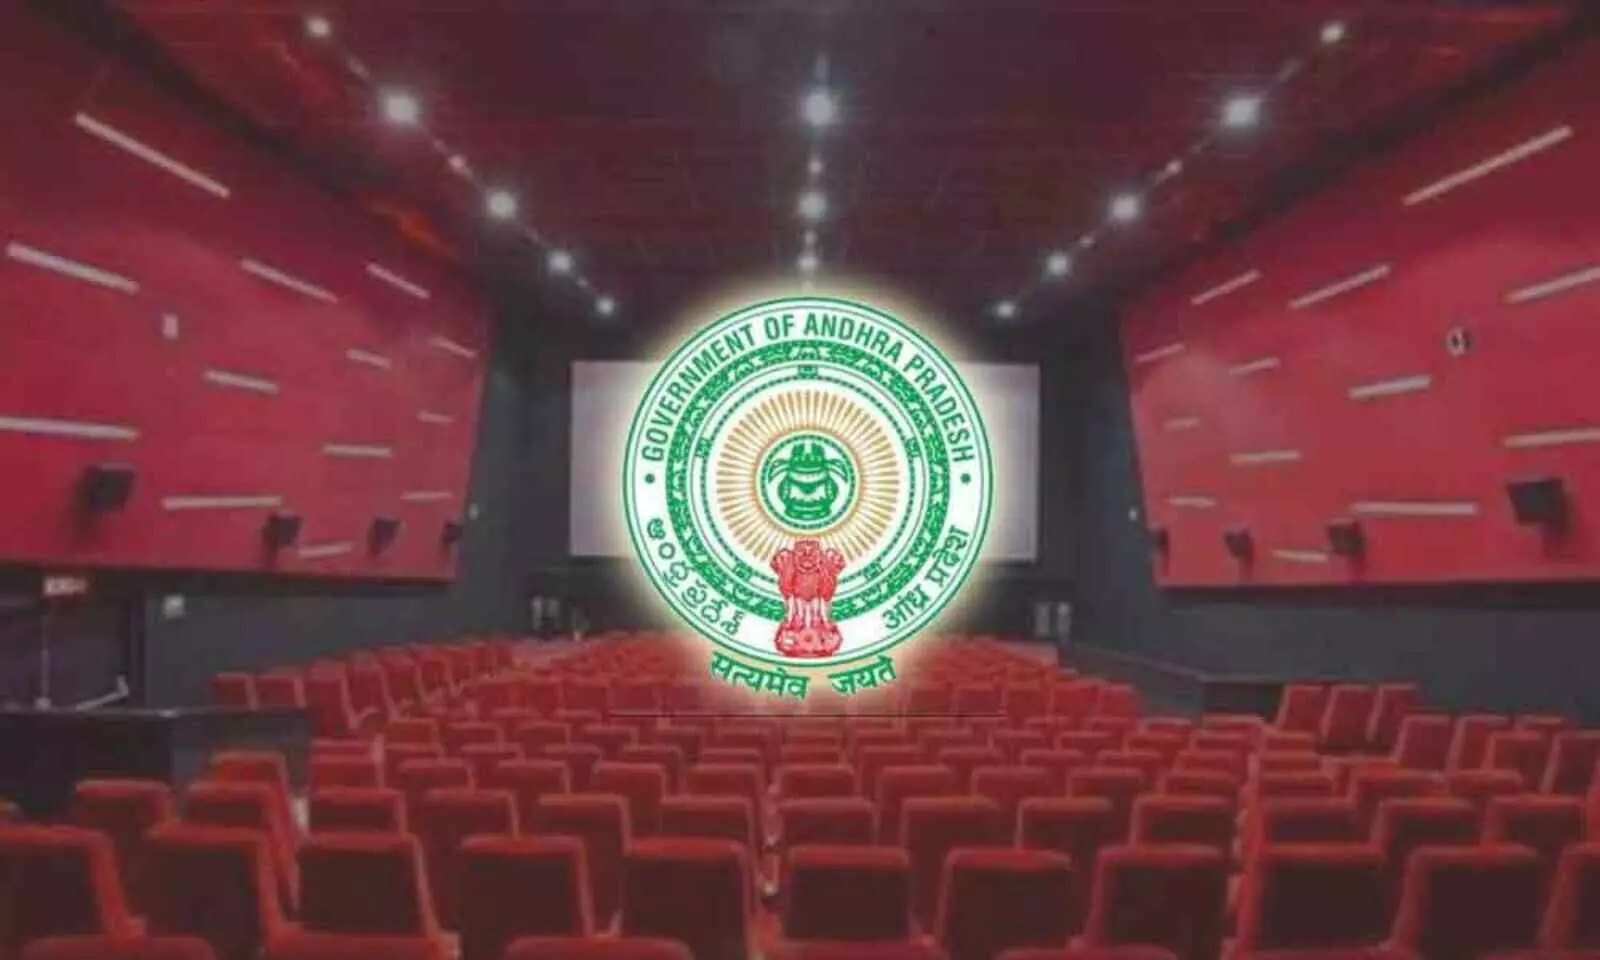 ap-govt-fix-commission-on-movie-tickets